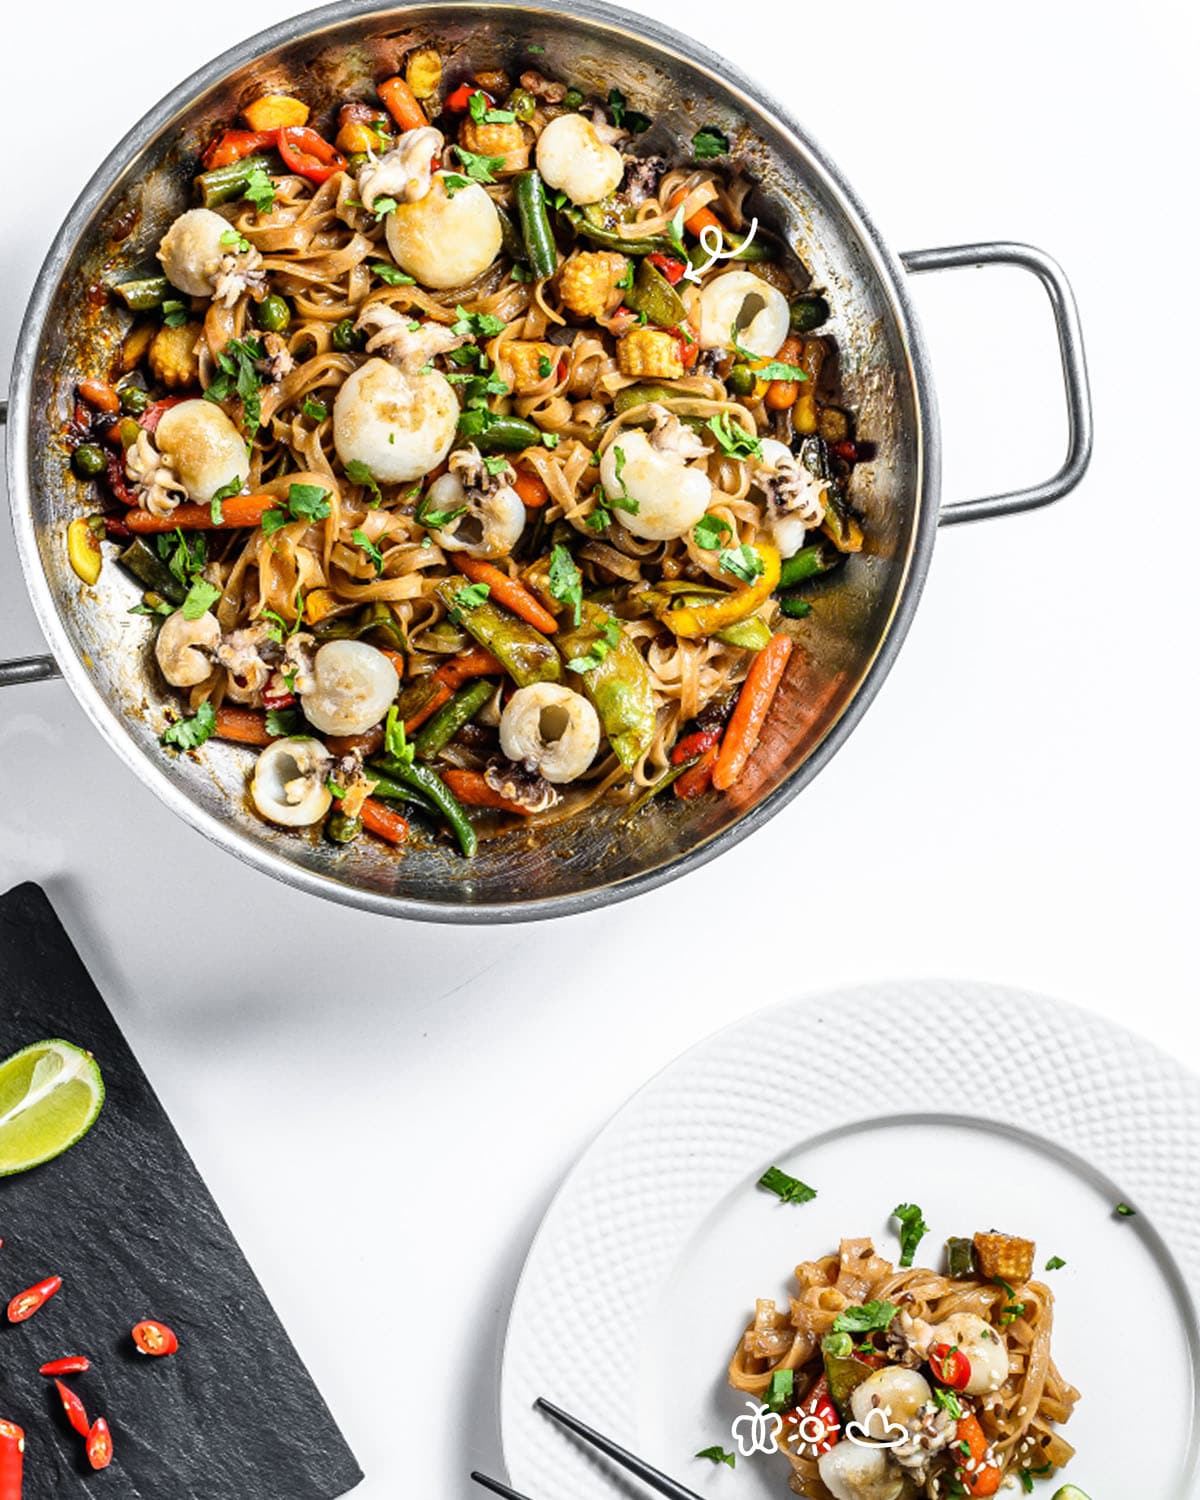 Don't despair! With a few simple steps, you can reheat your stir fry so it's just as delicious as when it was first cooked.